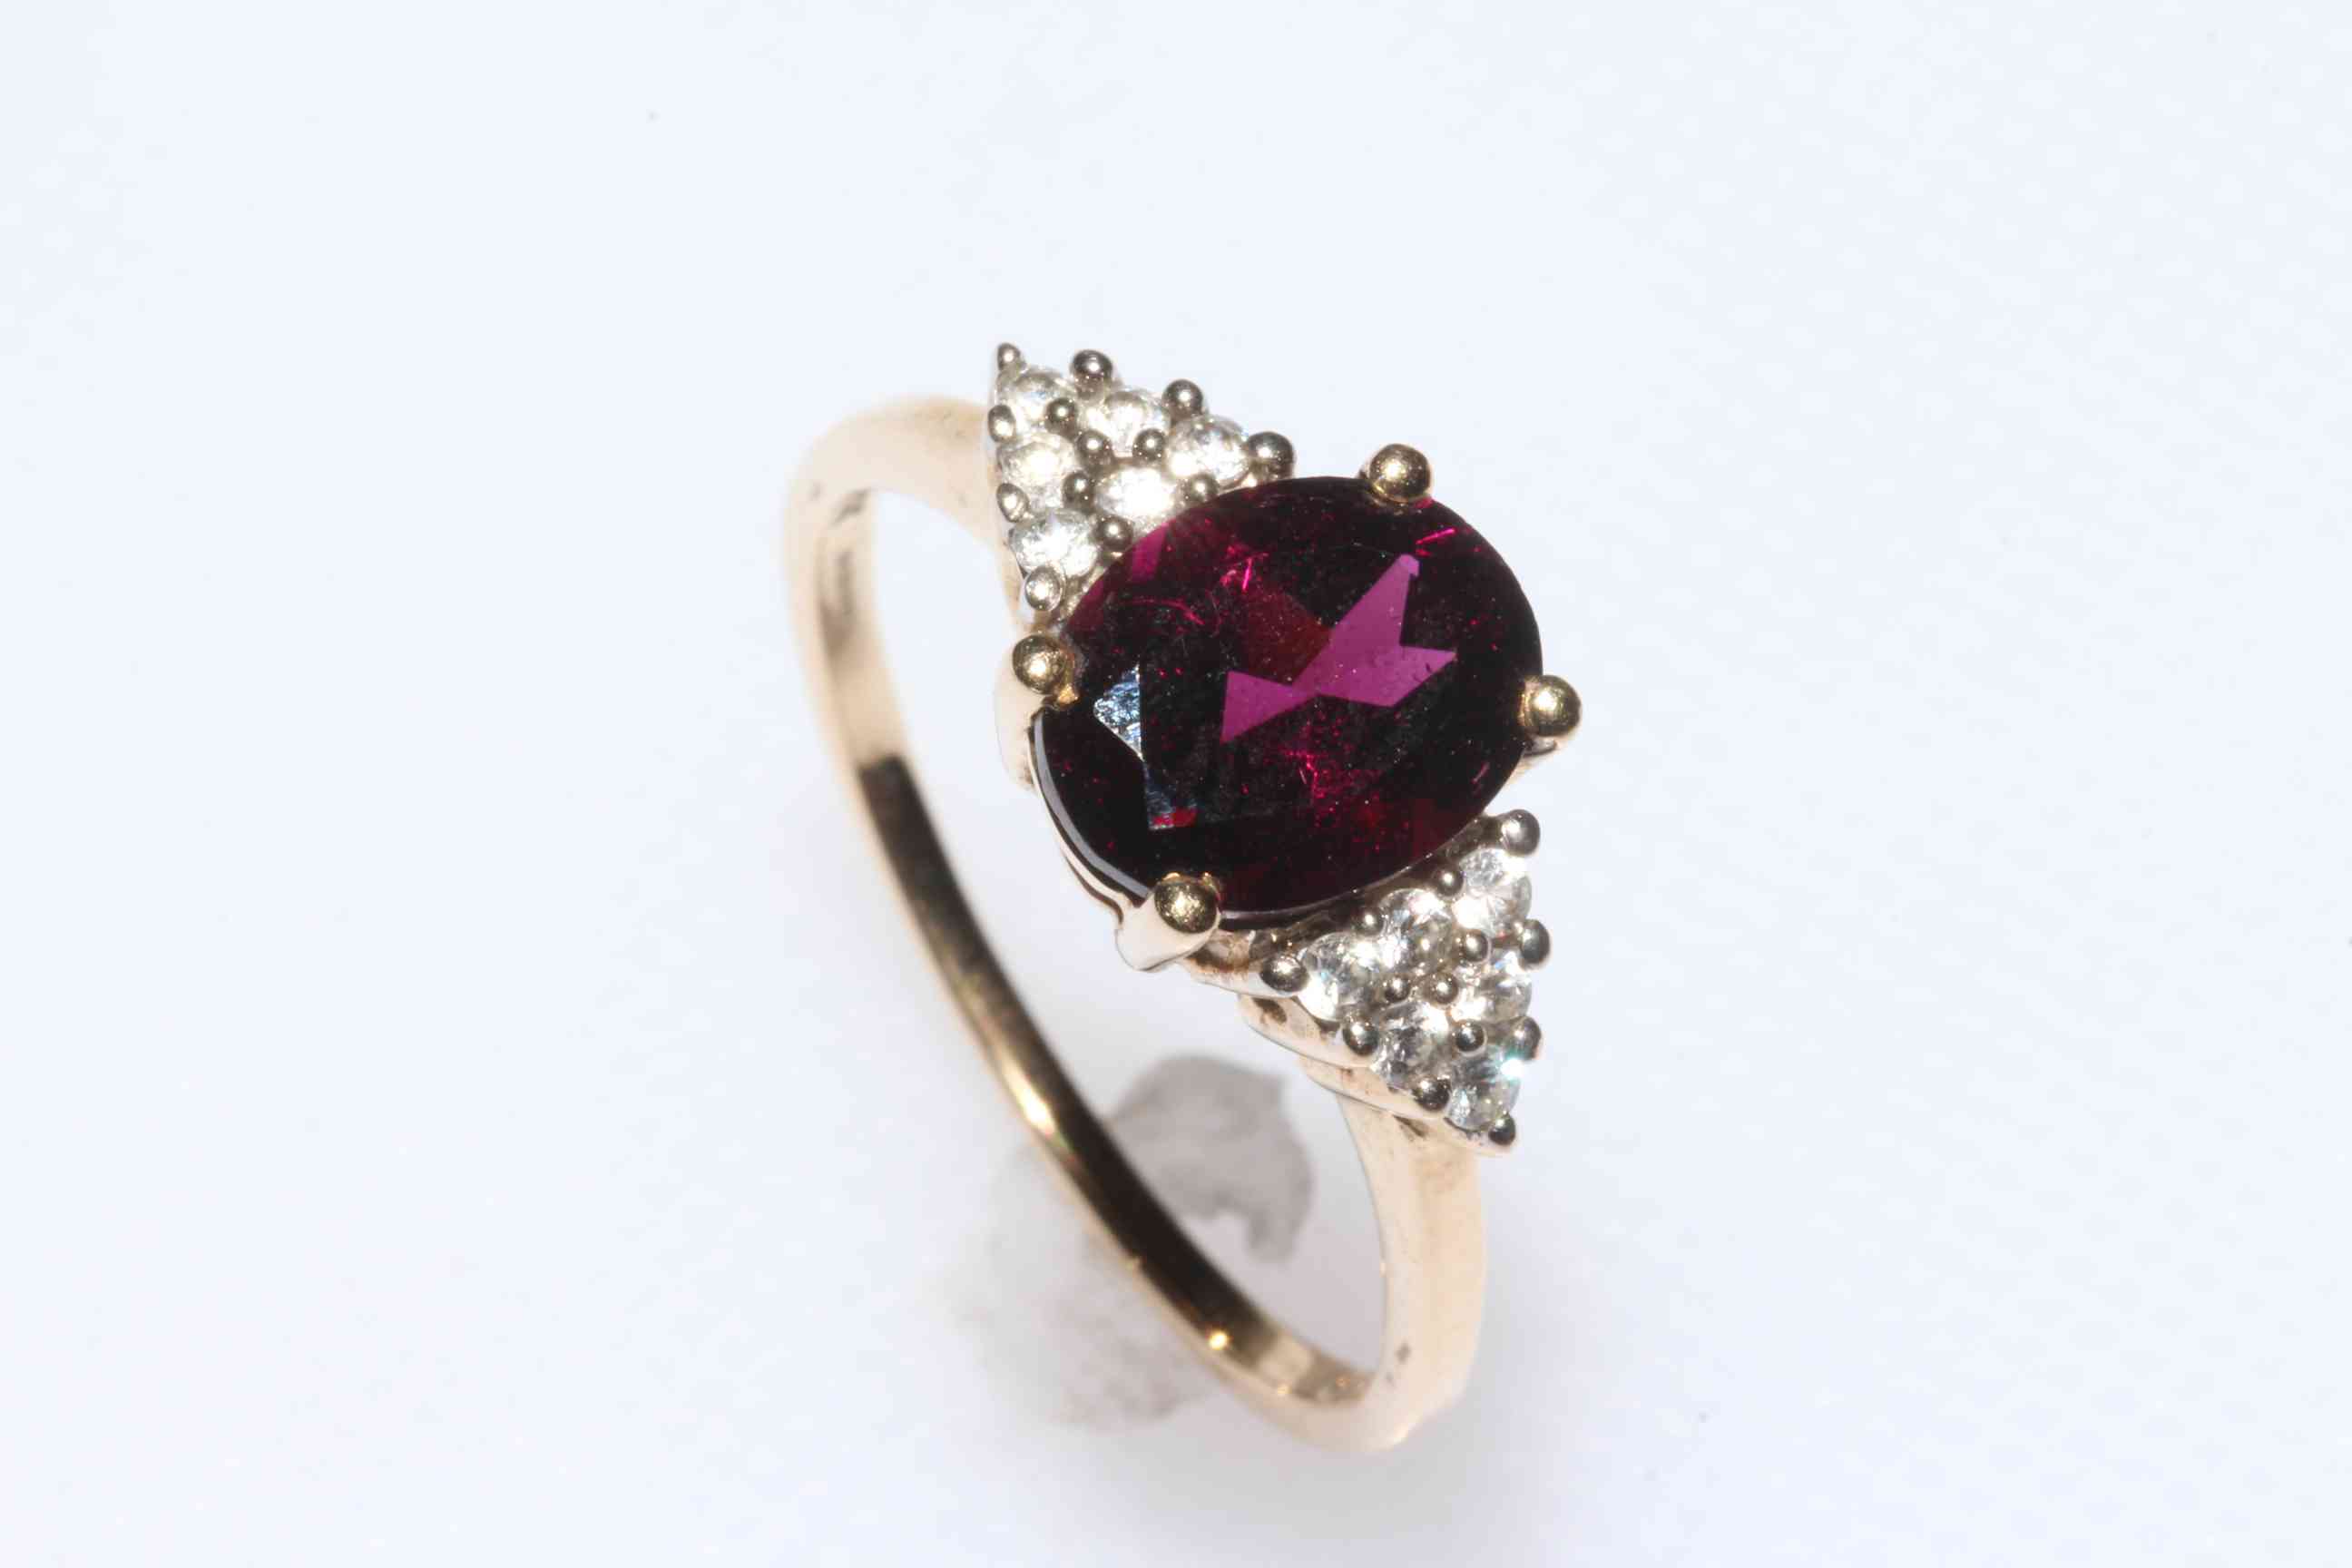 Rajasthan garnet and zircon 9k gold ring, size P/Q, with certificate.